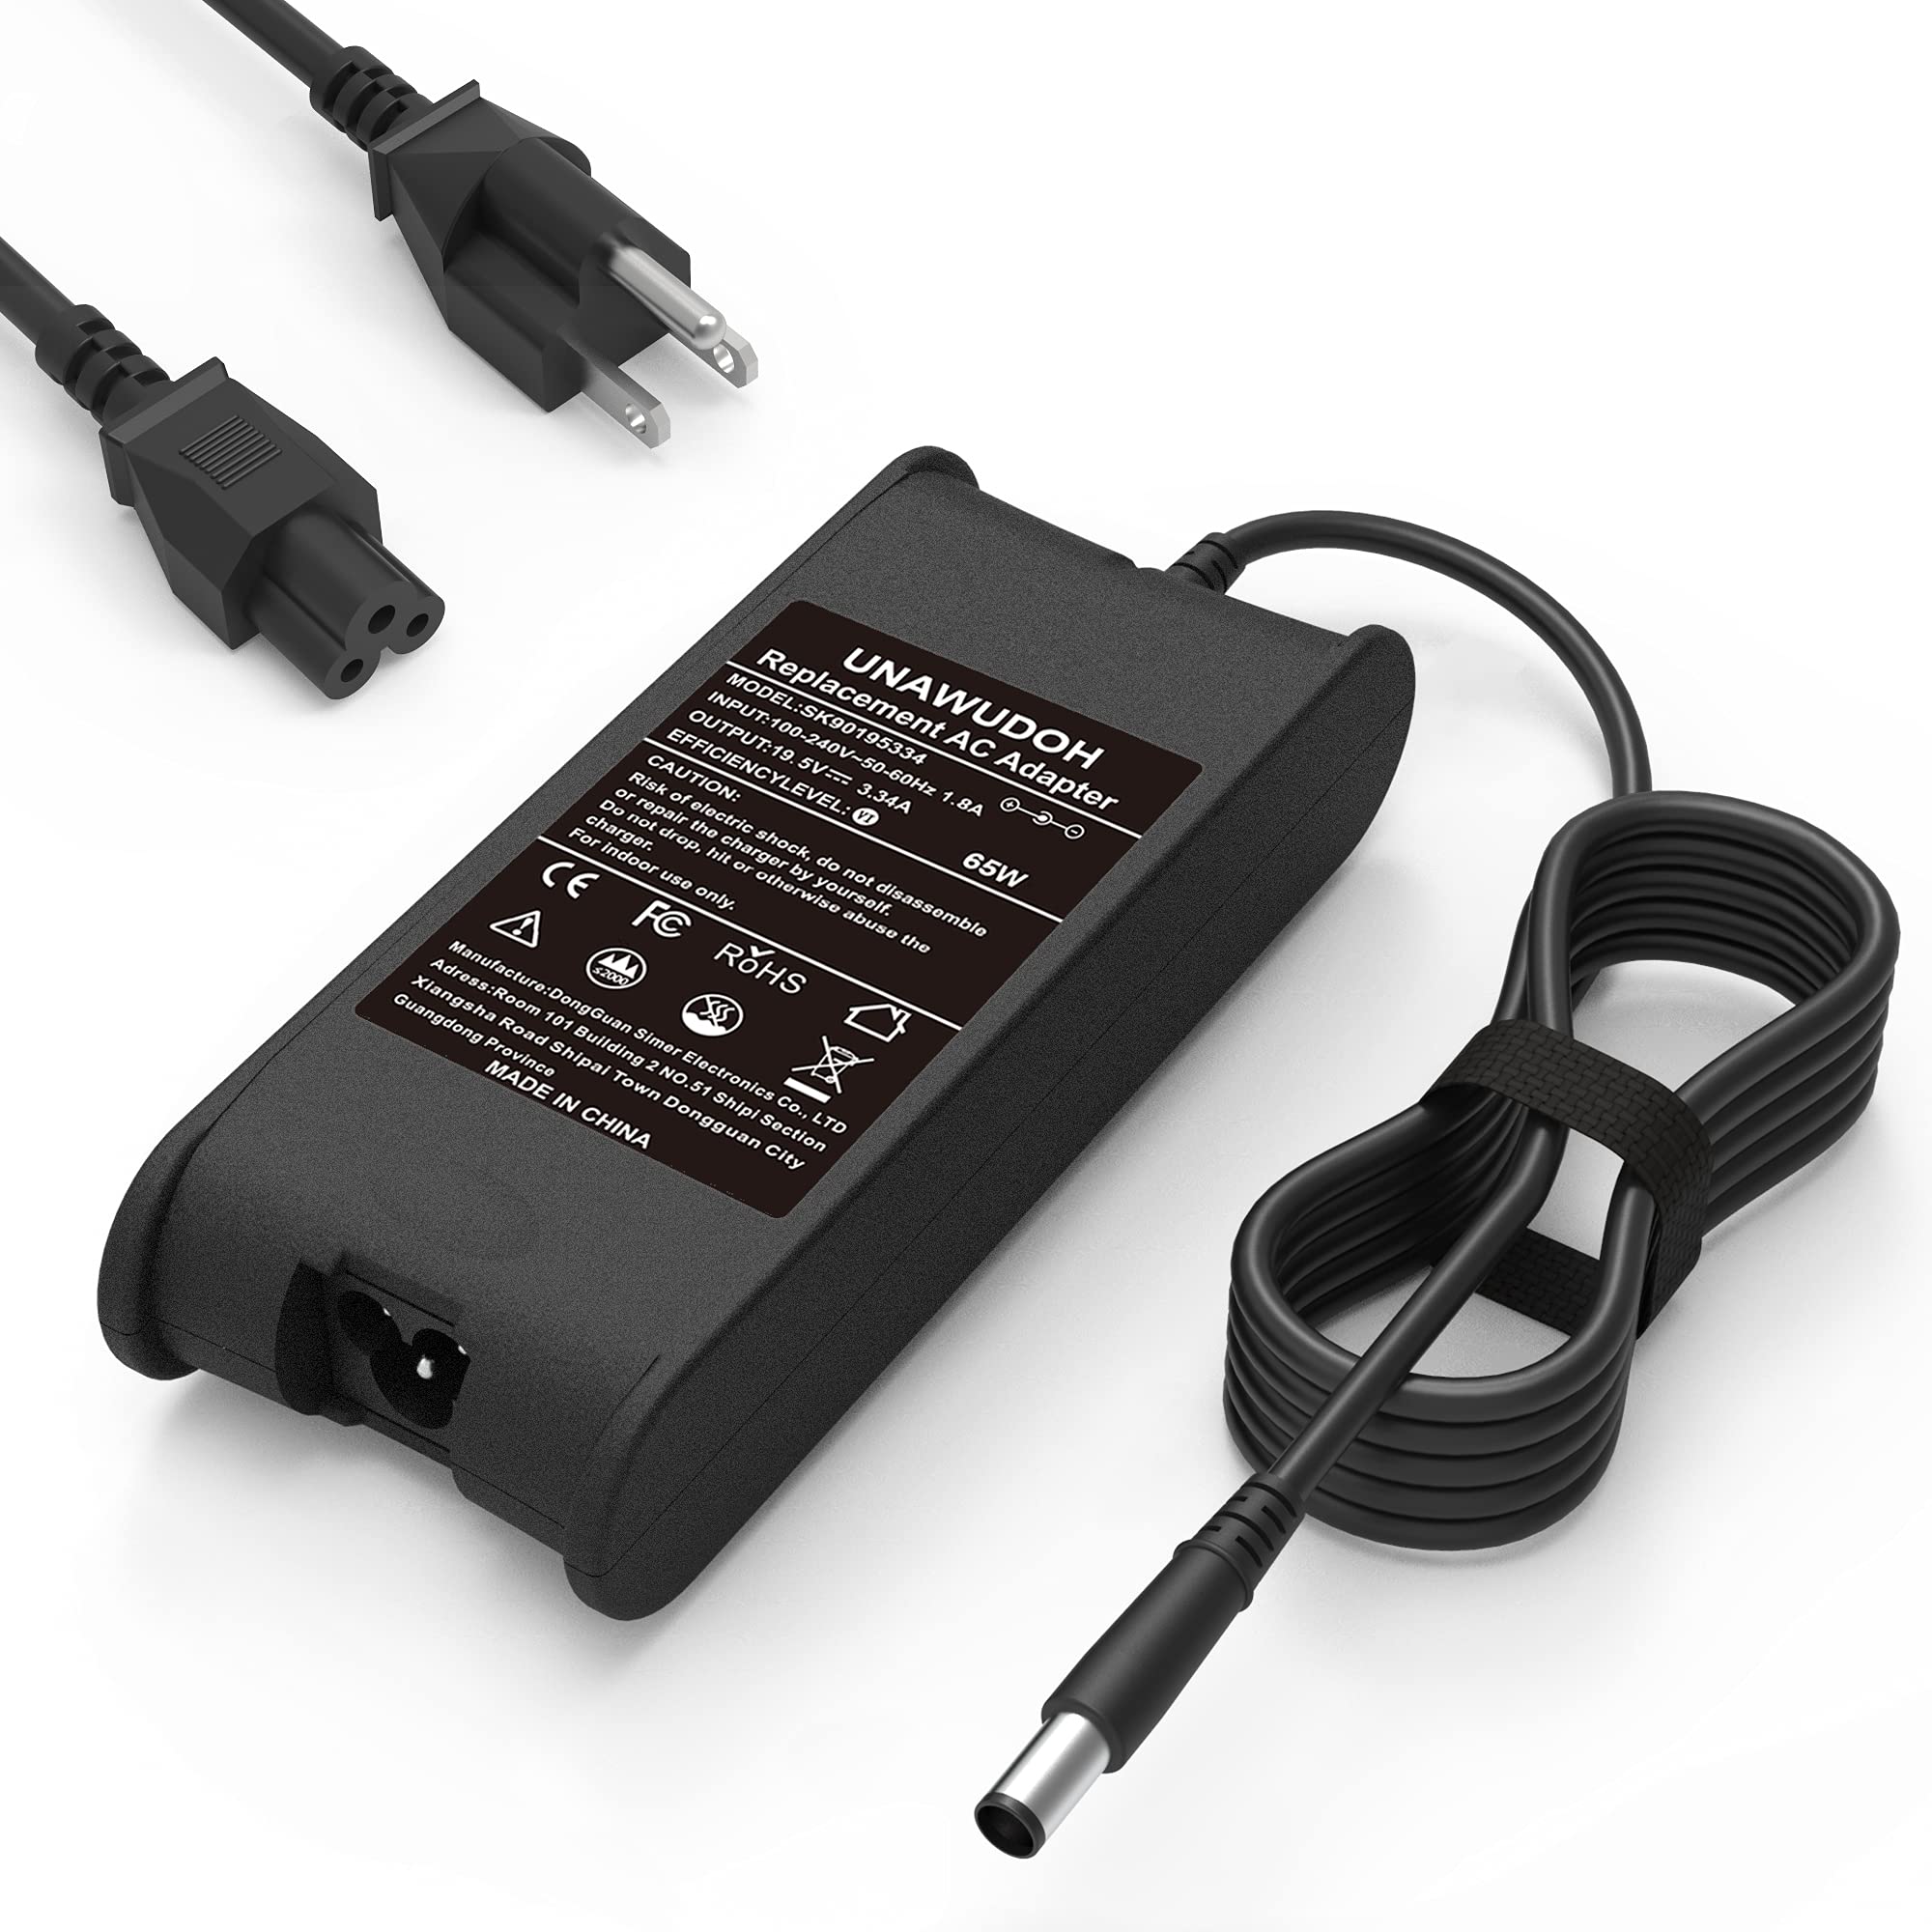 Mua New 65W   Ac Adapter Charger Power Supply for Dell Latitude  E5440 E7270 E6430s E5430 E6530 E7470 E7240 E7270 E5420 E6320 D620 E6410  E6420 E6510 Inspiron 1525 1501 1545 5748